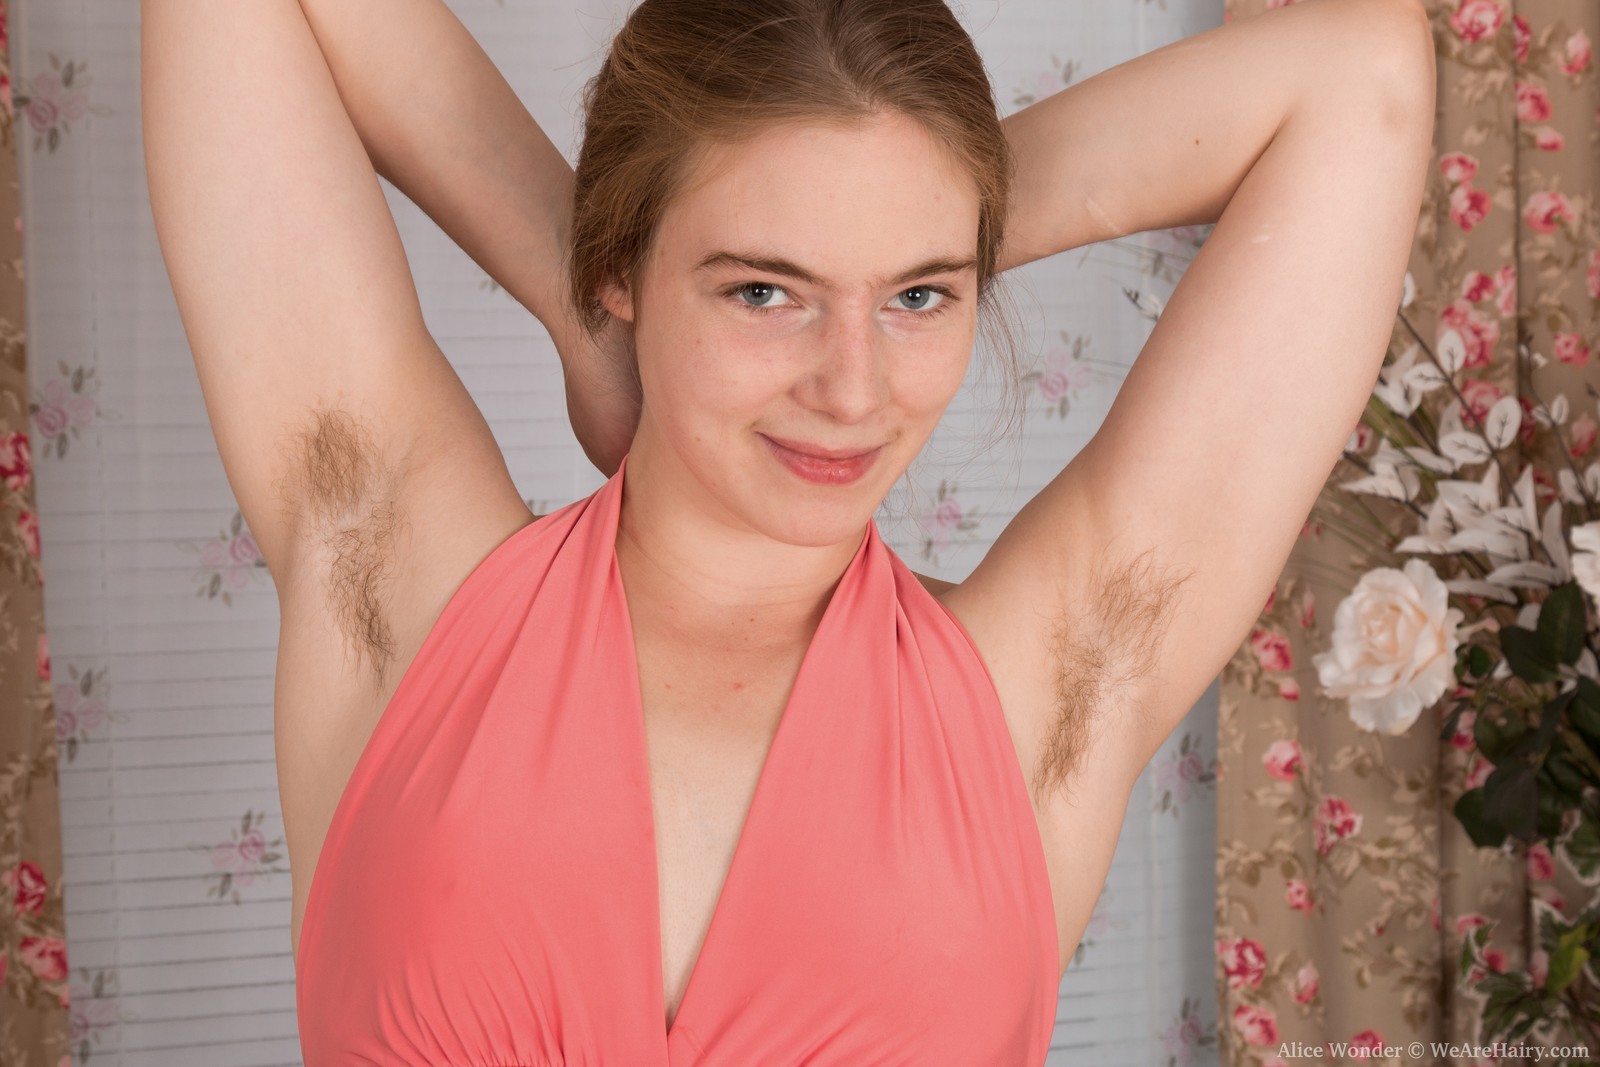 Alice Wonder - Alice Wonder strips and shows off her hairy body